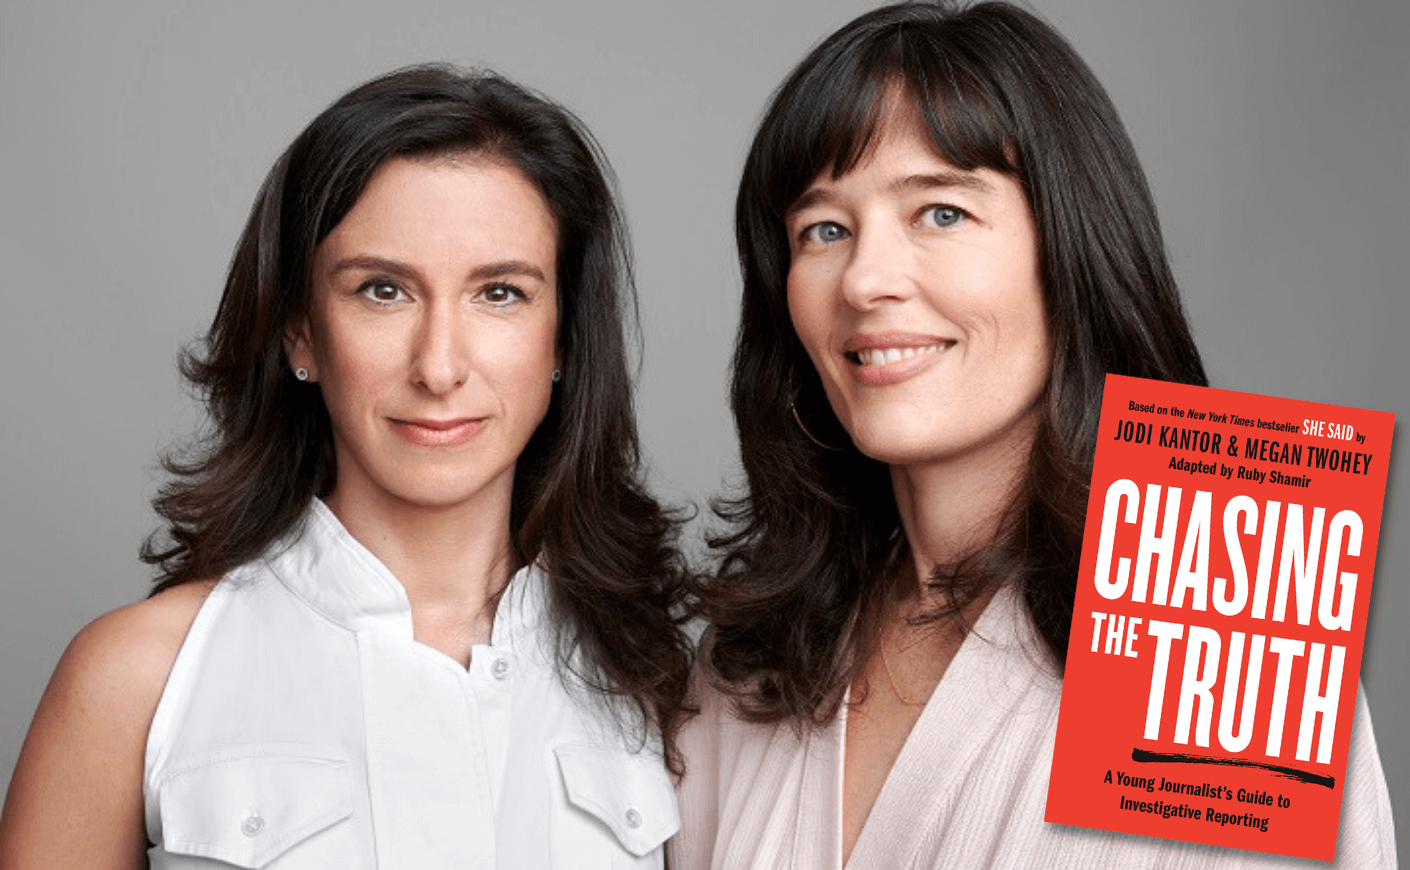 Jodi Kantor and Megan Twohey and Chasing the Truth Book